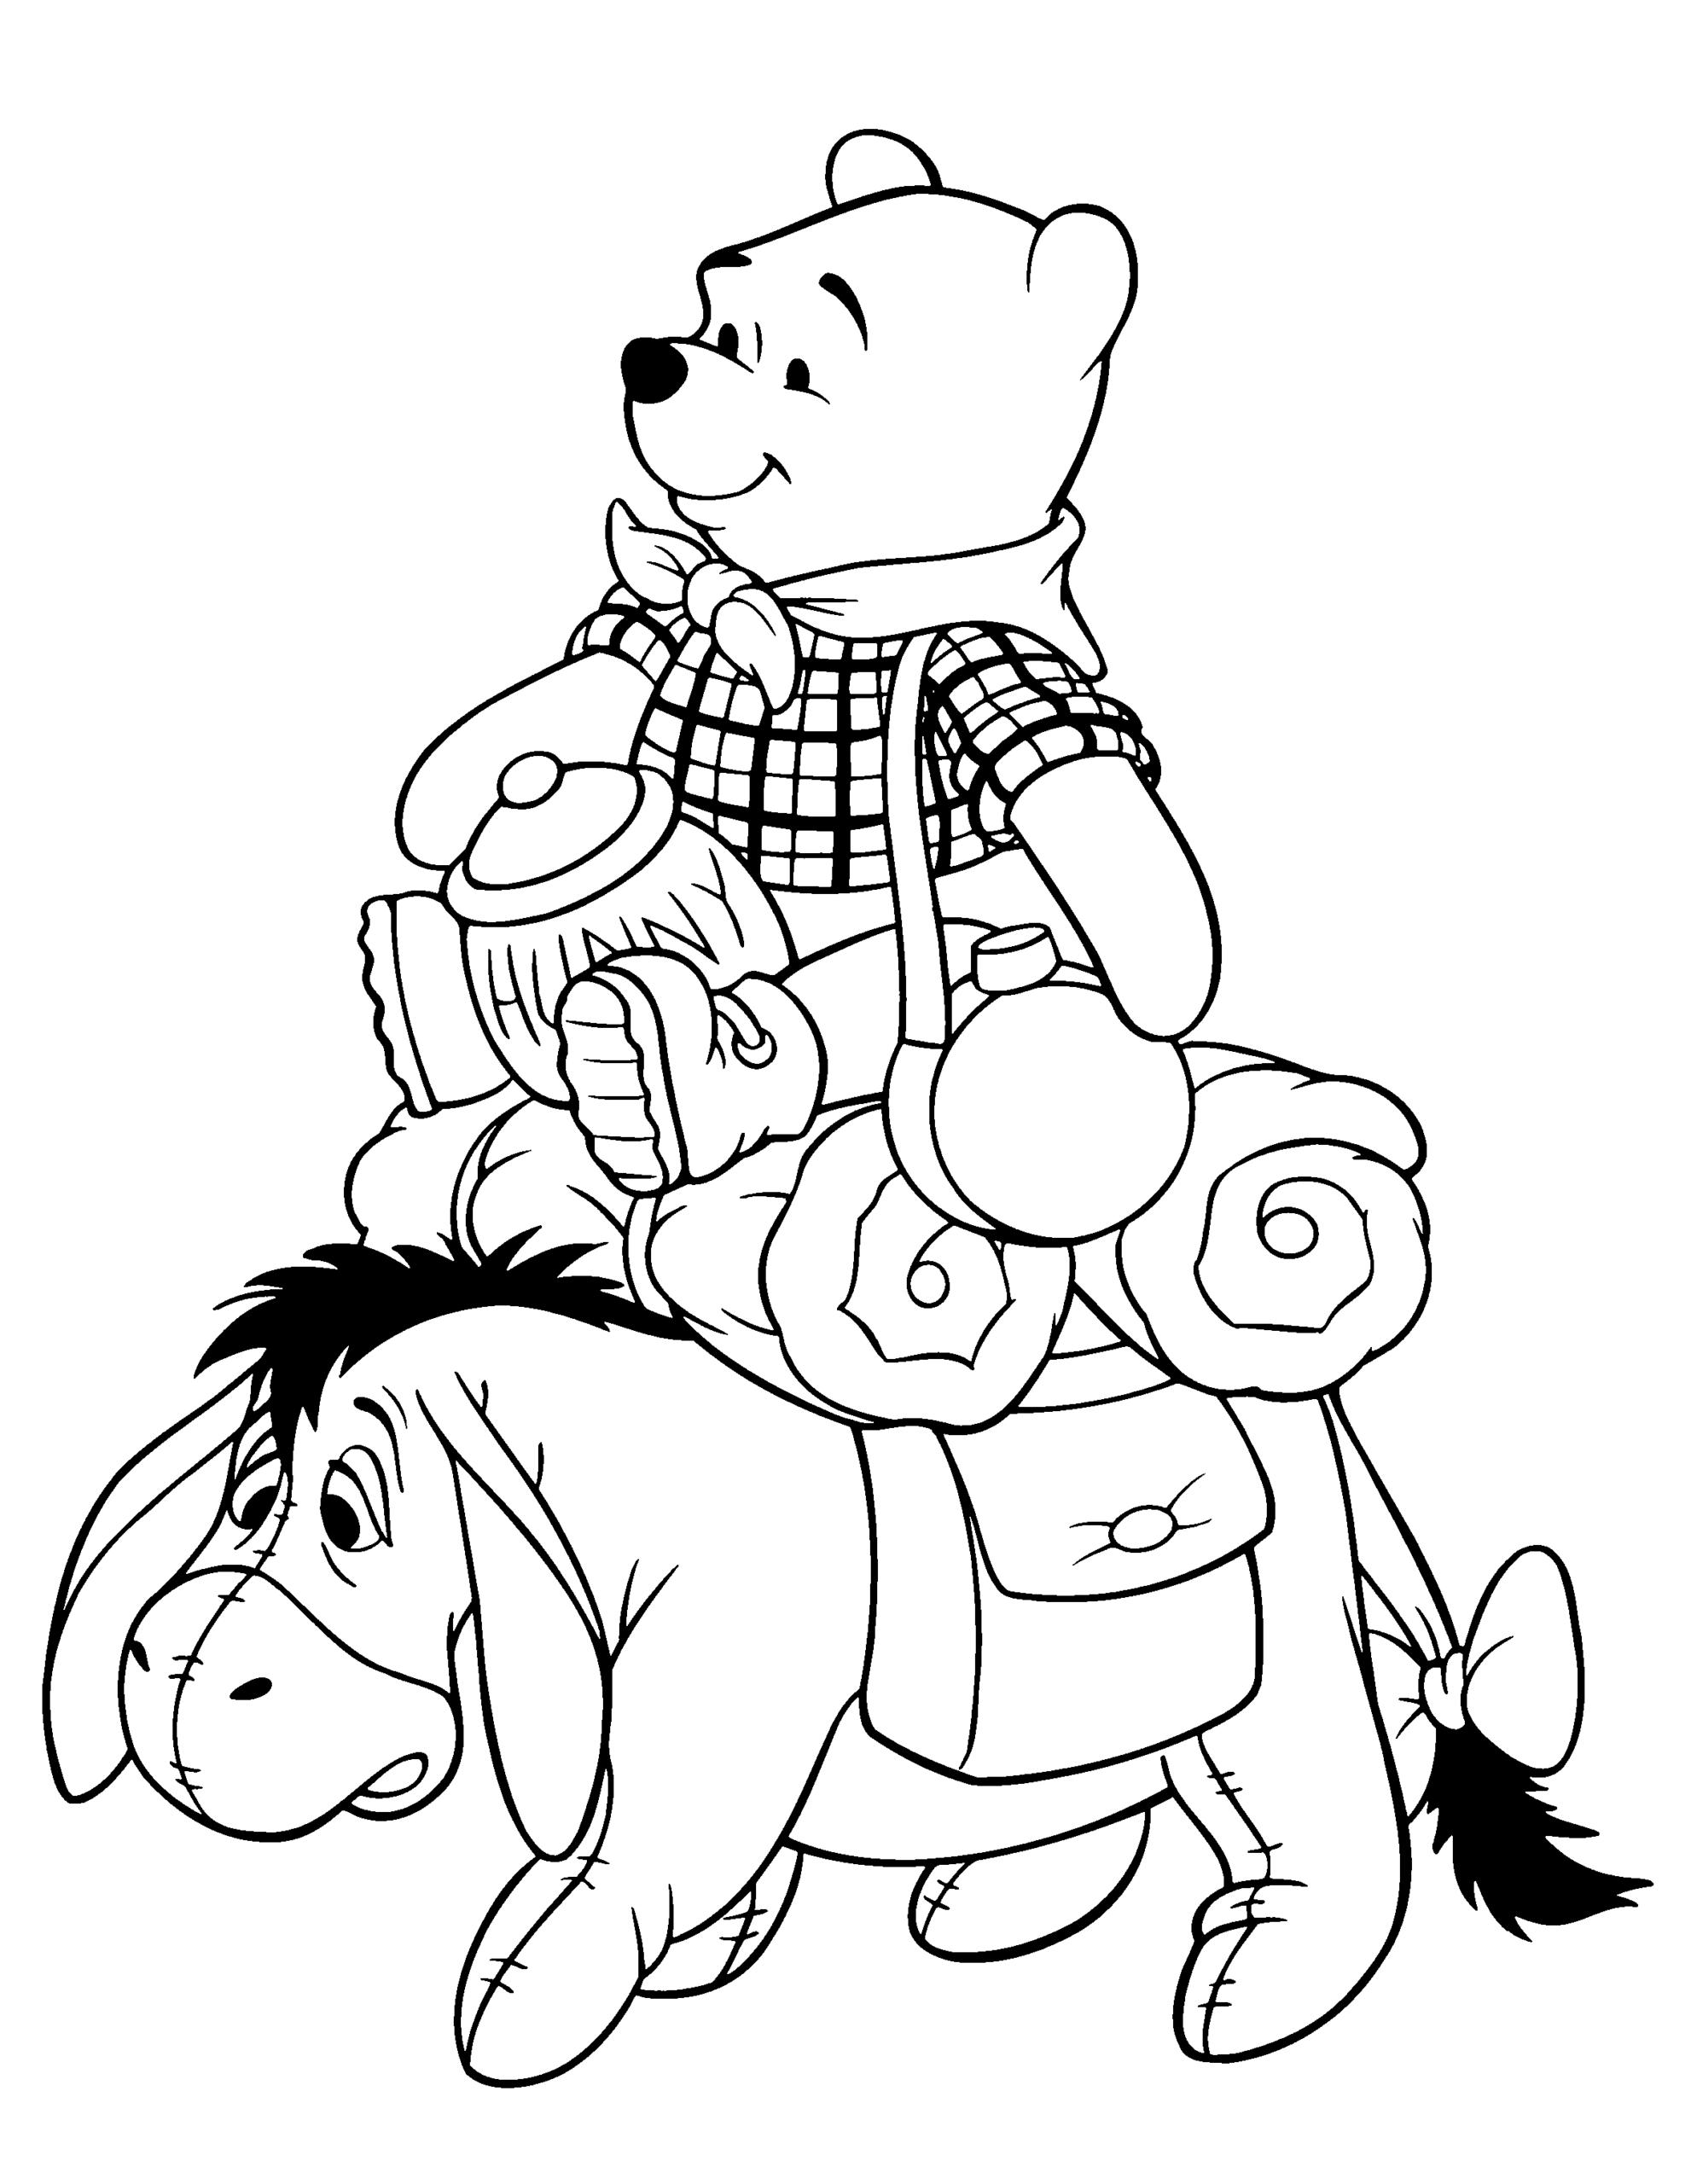 Winnie the Pooh Coloring Pages Cartoons Winnie The Pooh and Friends Free Printable 2020 7060 Coloring4free